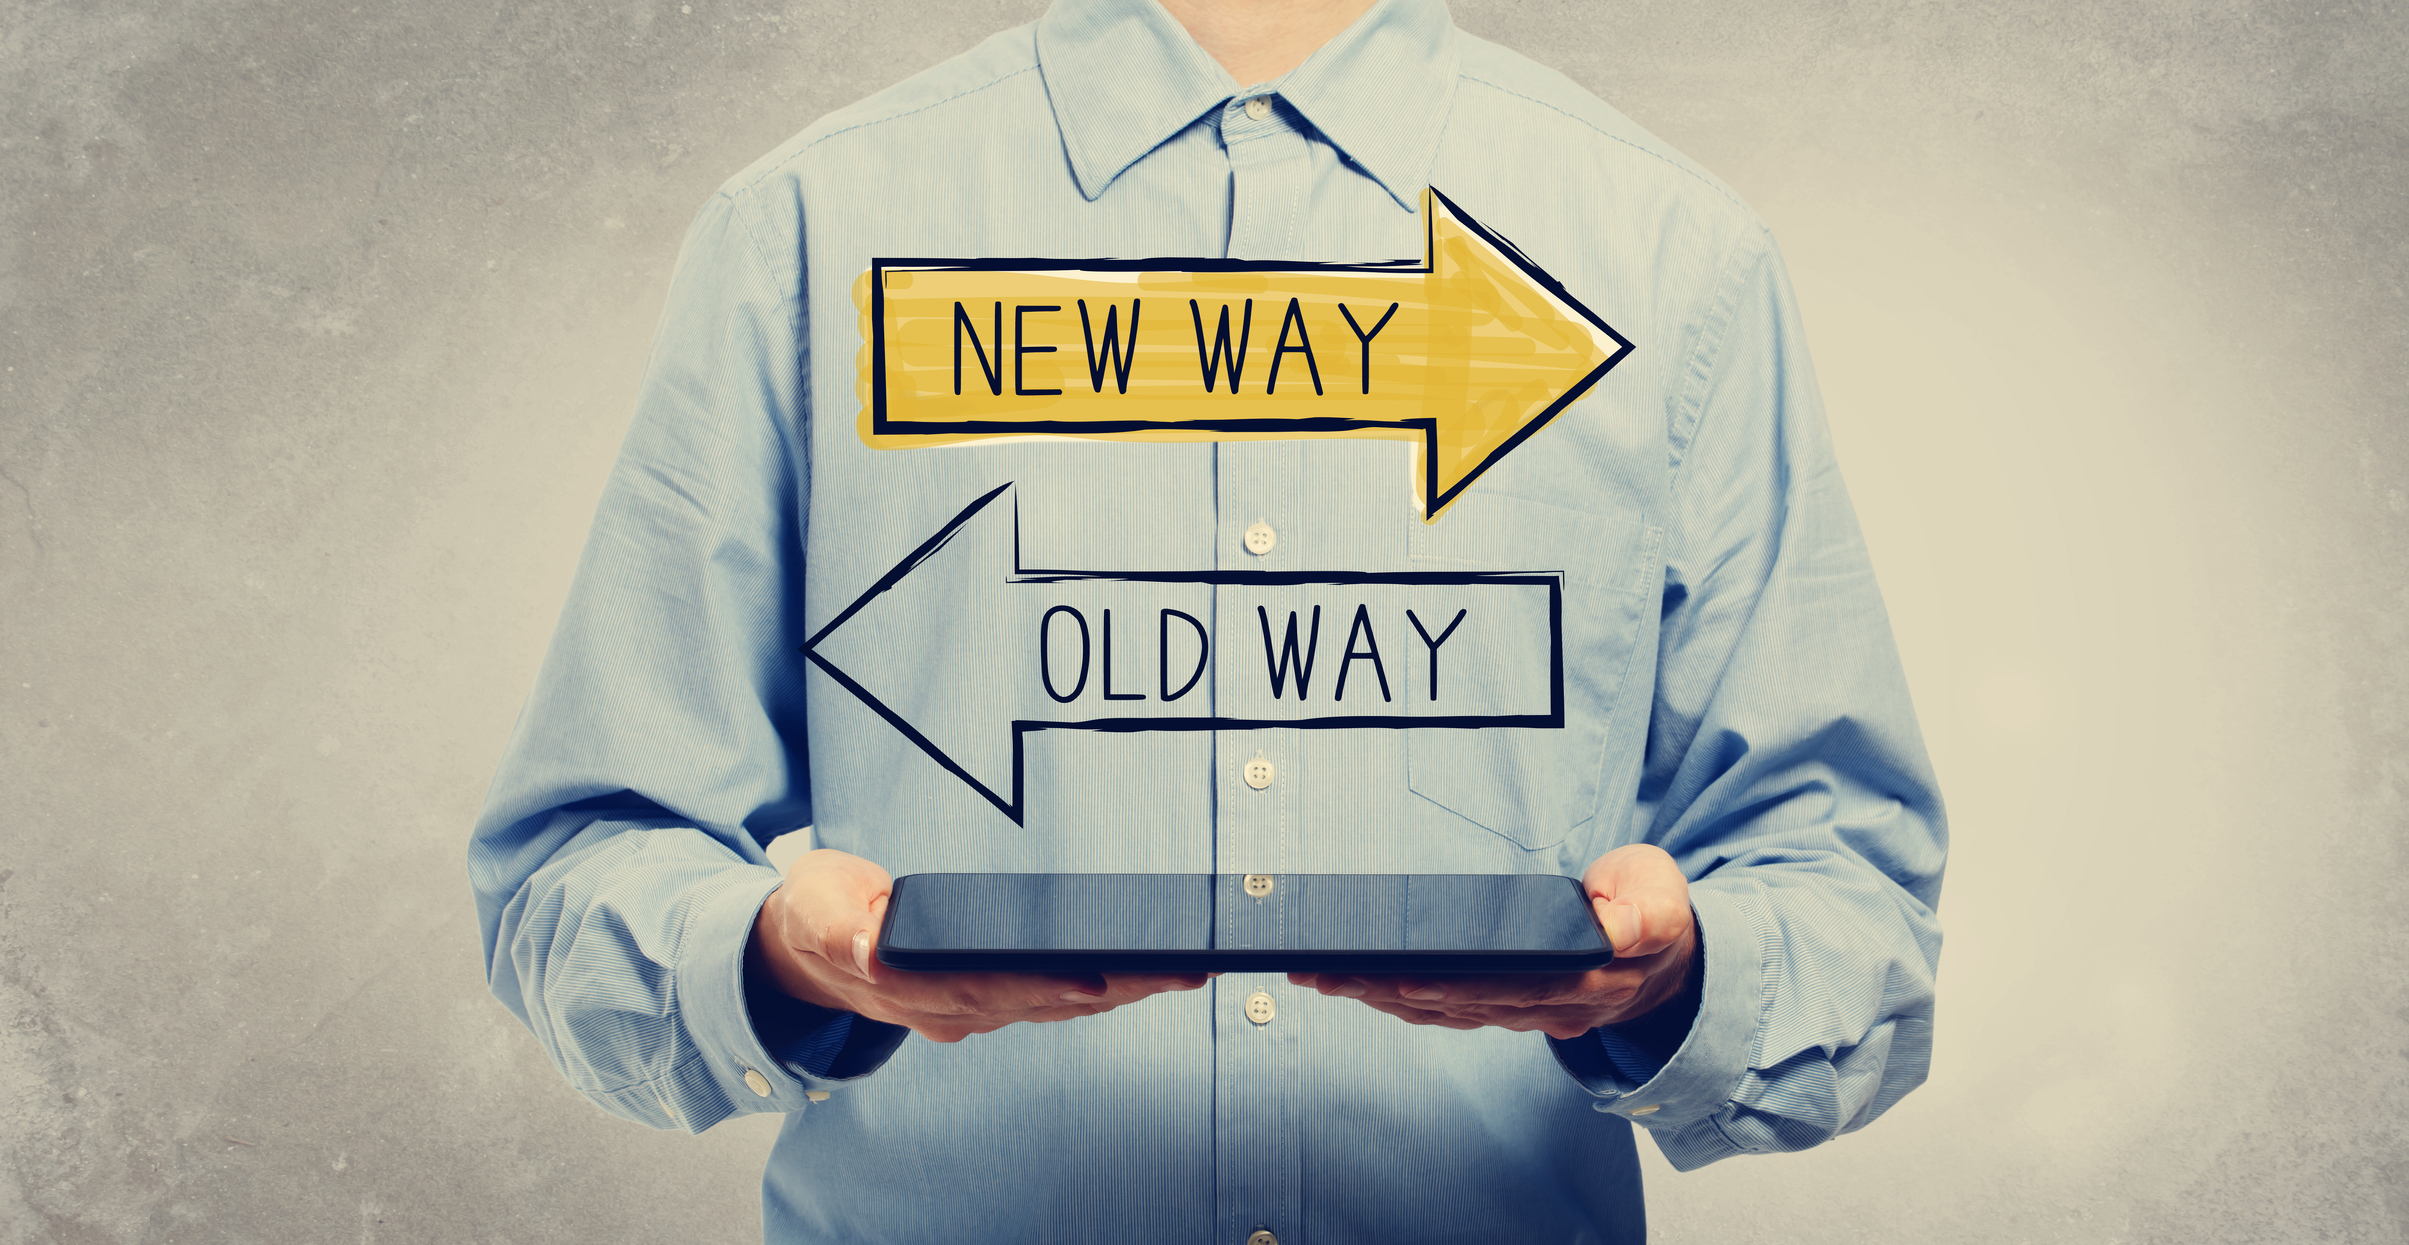 Graphic of a man in a blue shirt holding a computer-generated sign with two arrows that say “new way” and “old way” referencing the divide between sales and marketing cultures.